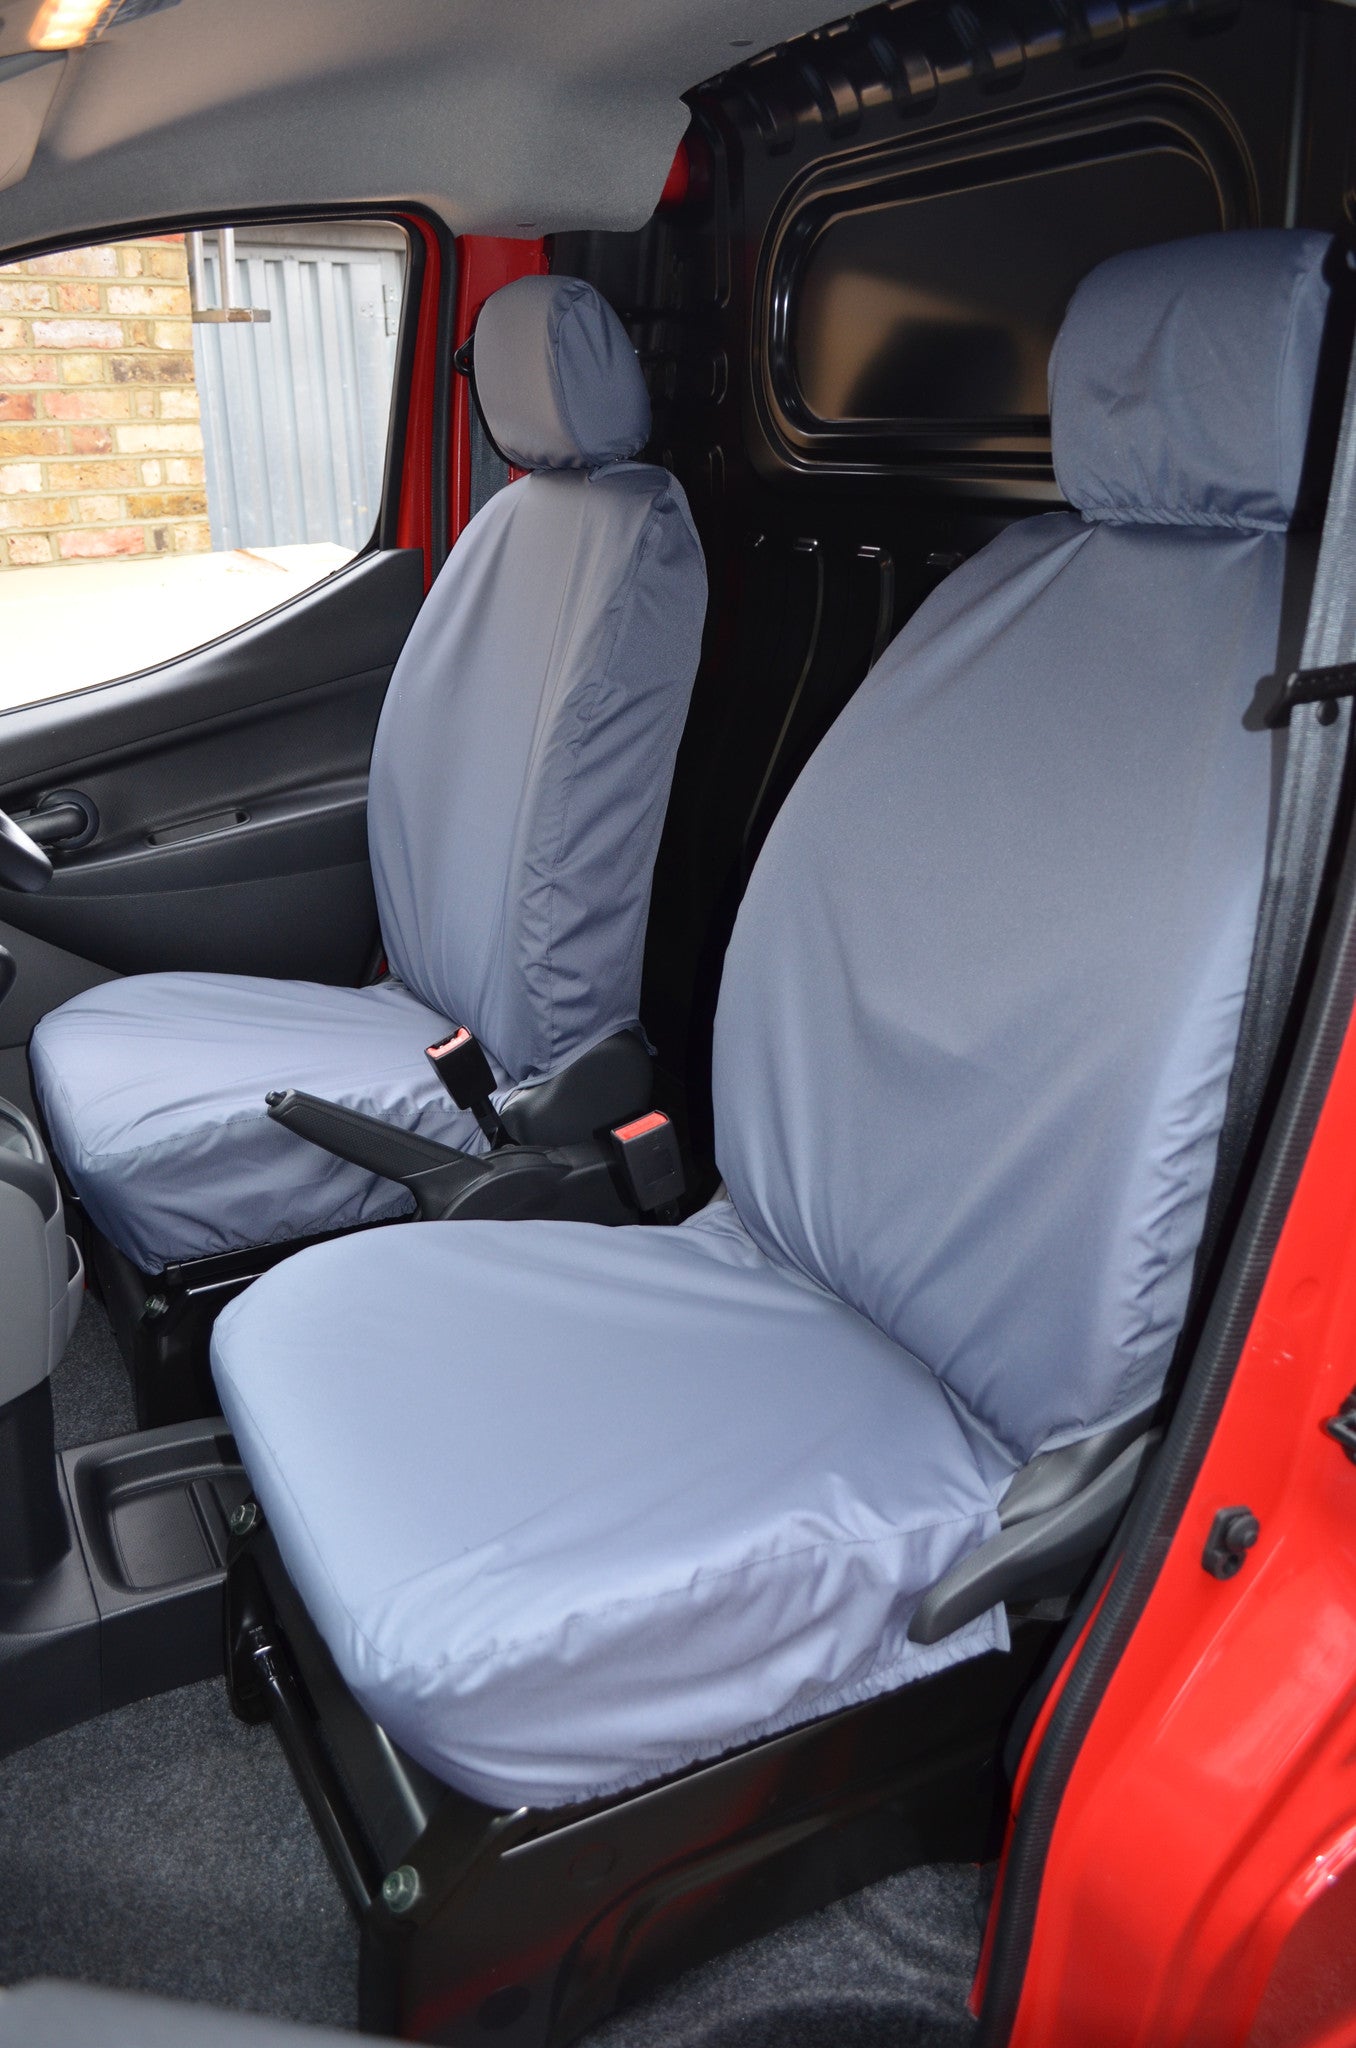 Nissan Waterproof Seat Covers | Tailored Vehicle Seat Covers